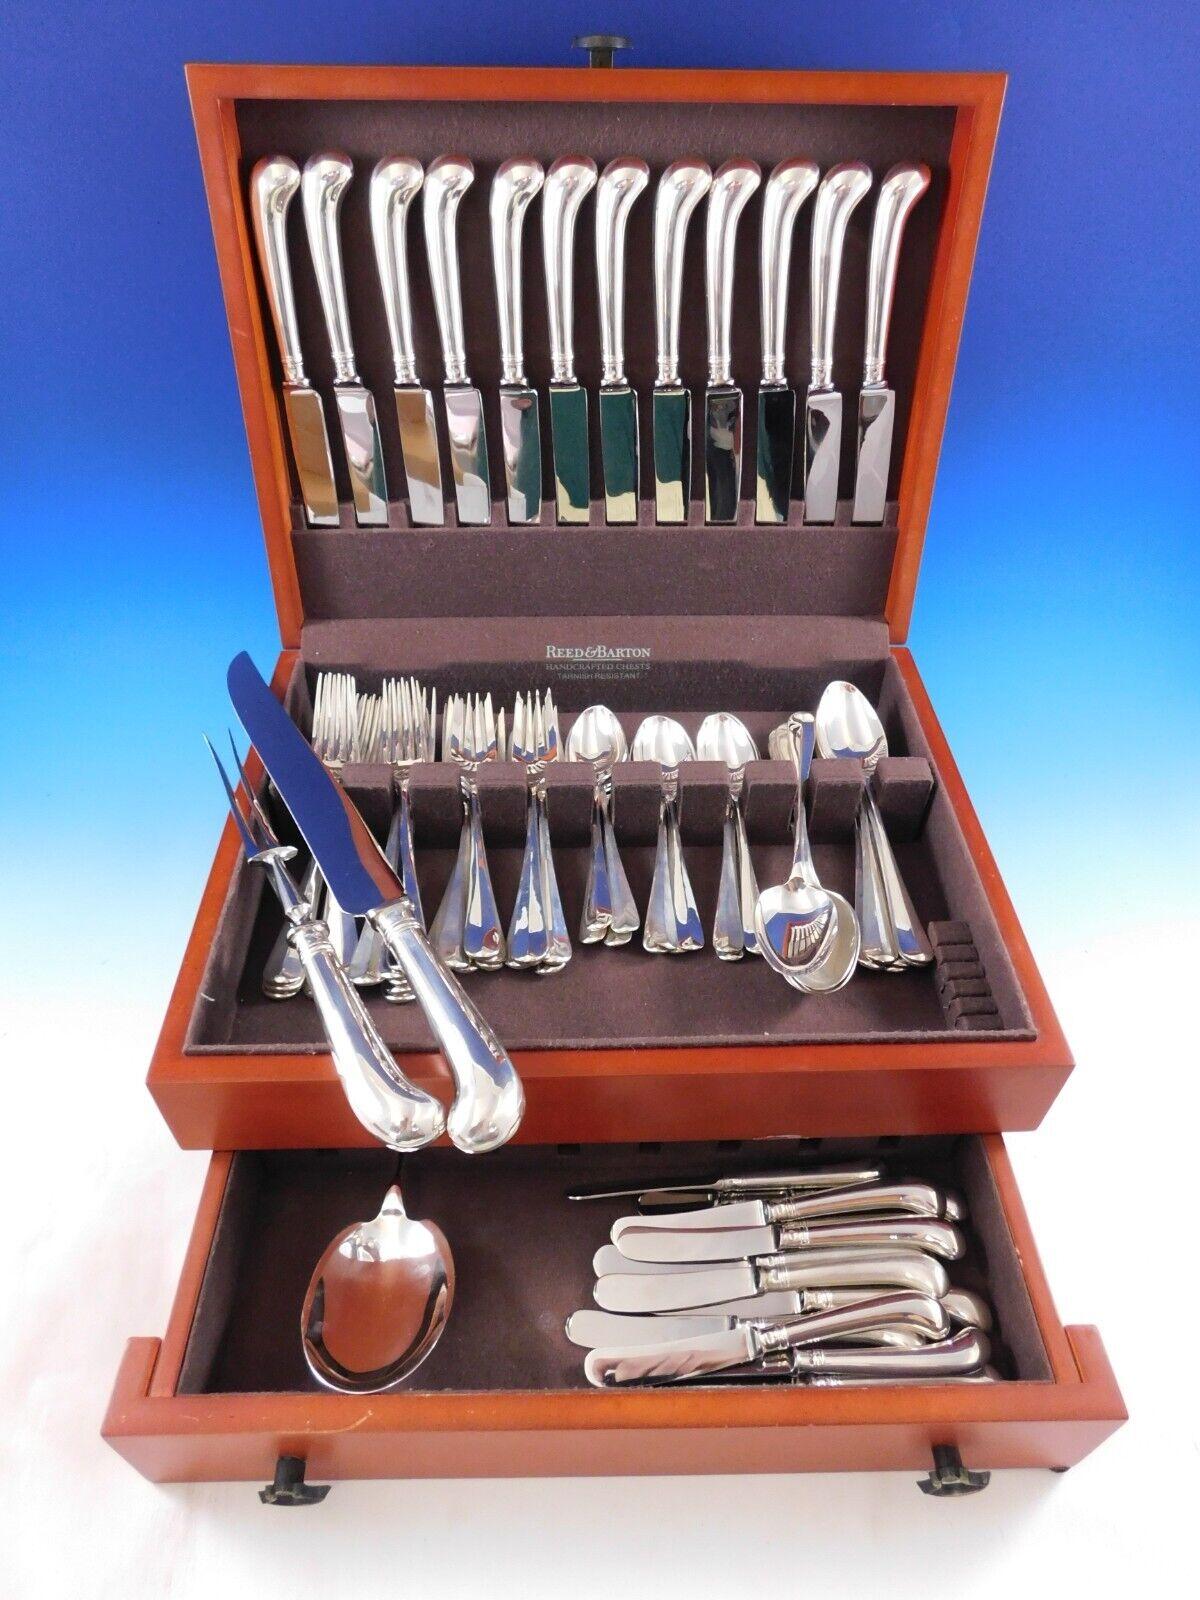 Incredible Dinner Size Rat Tail by Tiffany and Co. Sterling Silver Flatware set - 75 pieces. This set includes:

12 Dinner Knives with plain pistol grip handle, 9 3/4